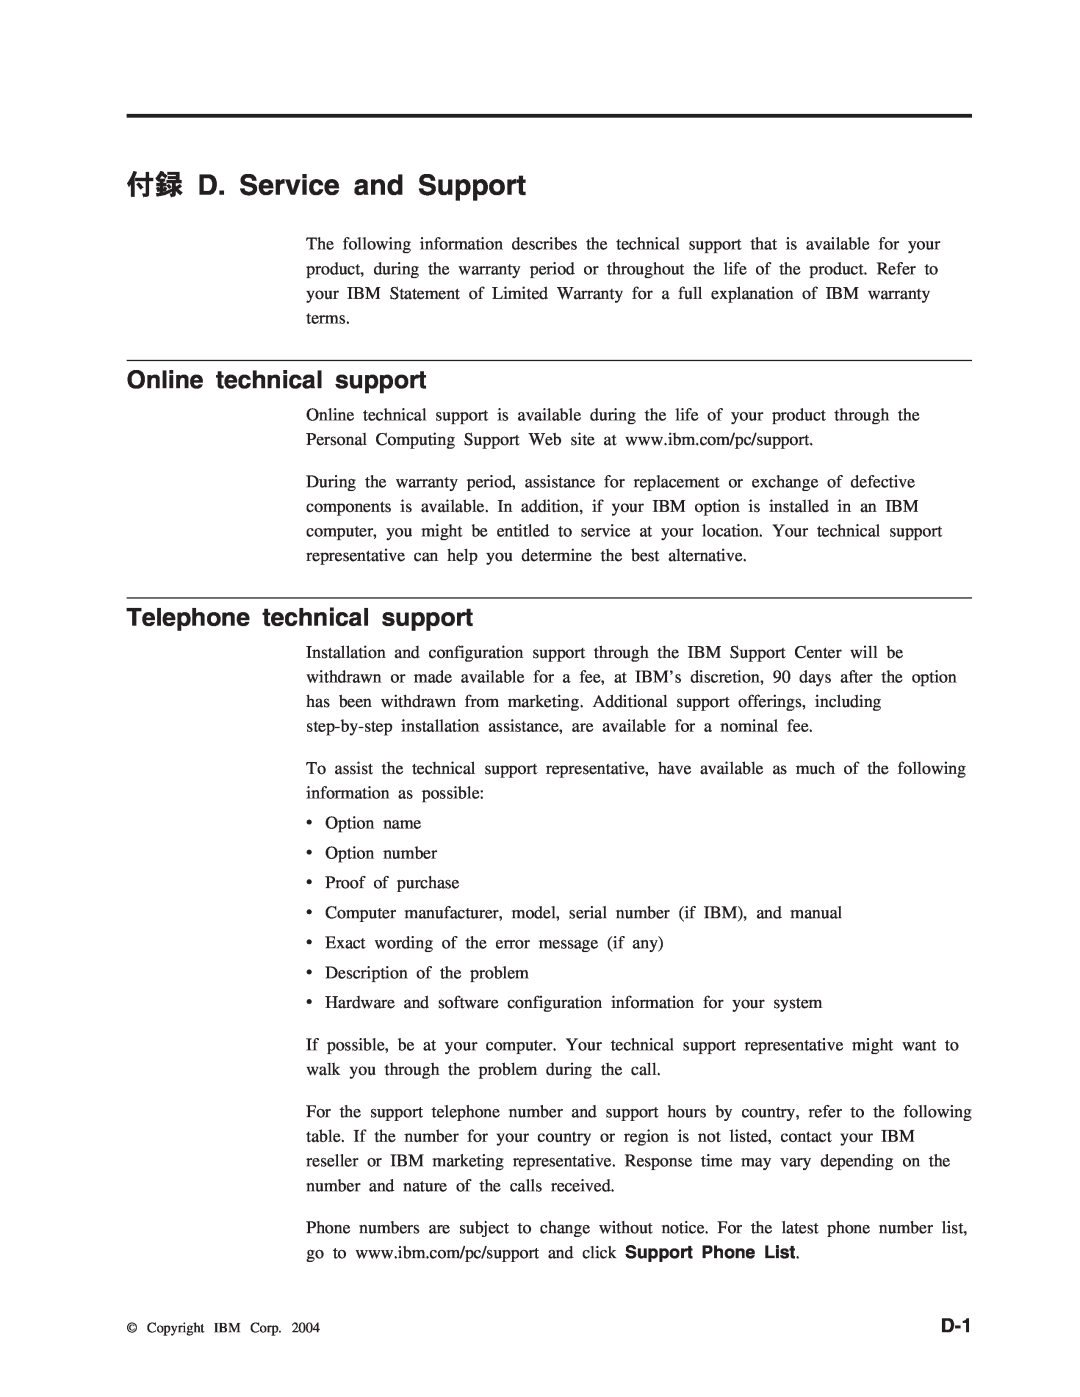 IBM M400 manual 付録 D. Service and Support, Online technical support, Telephone technical support 